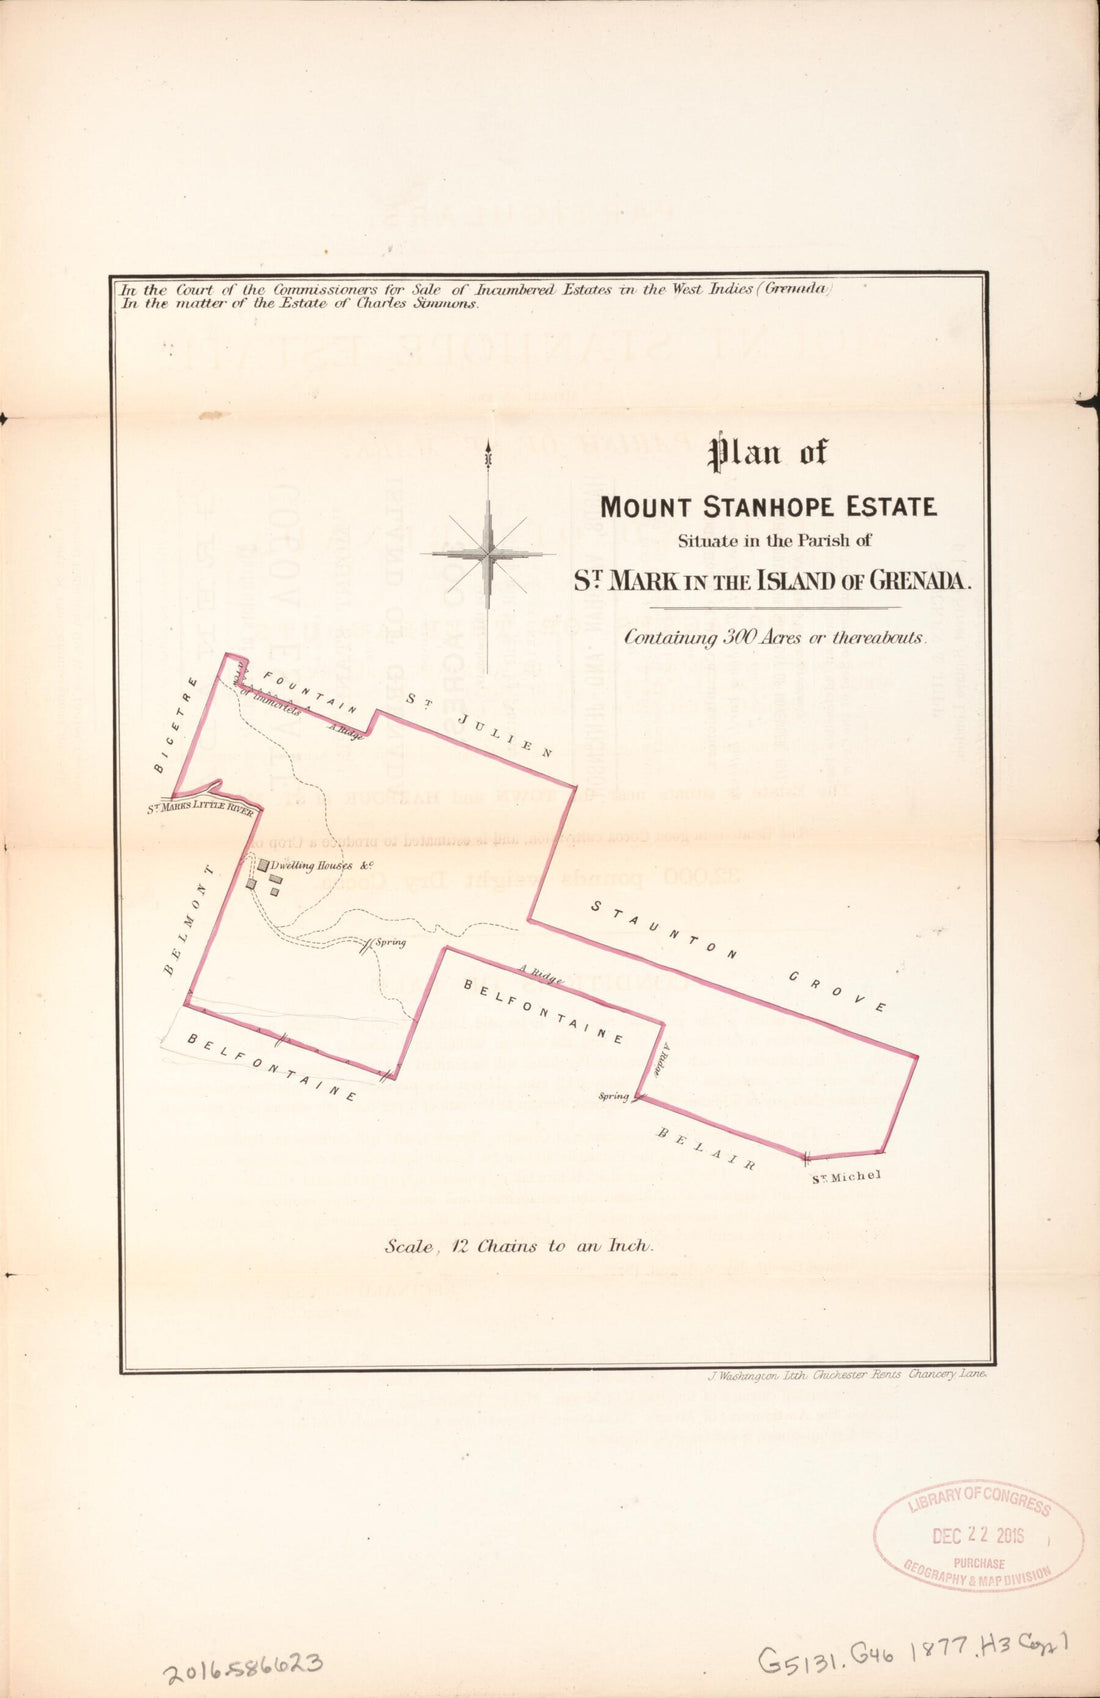 This old map of Plan of Mount Stanhope Estate from Encumbered Estates In the West Indies (Grenada) from 1877 was created by Vaughan Hards in 1877